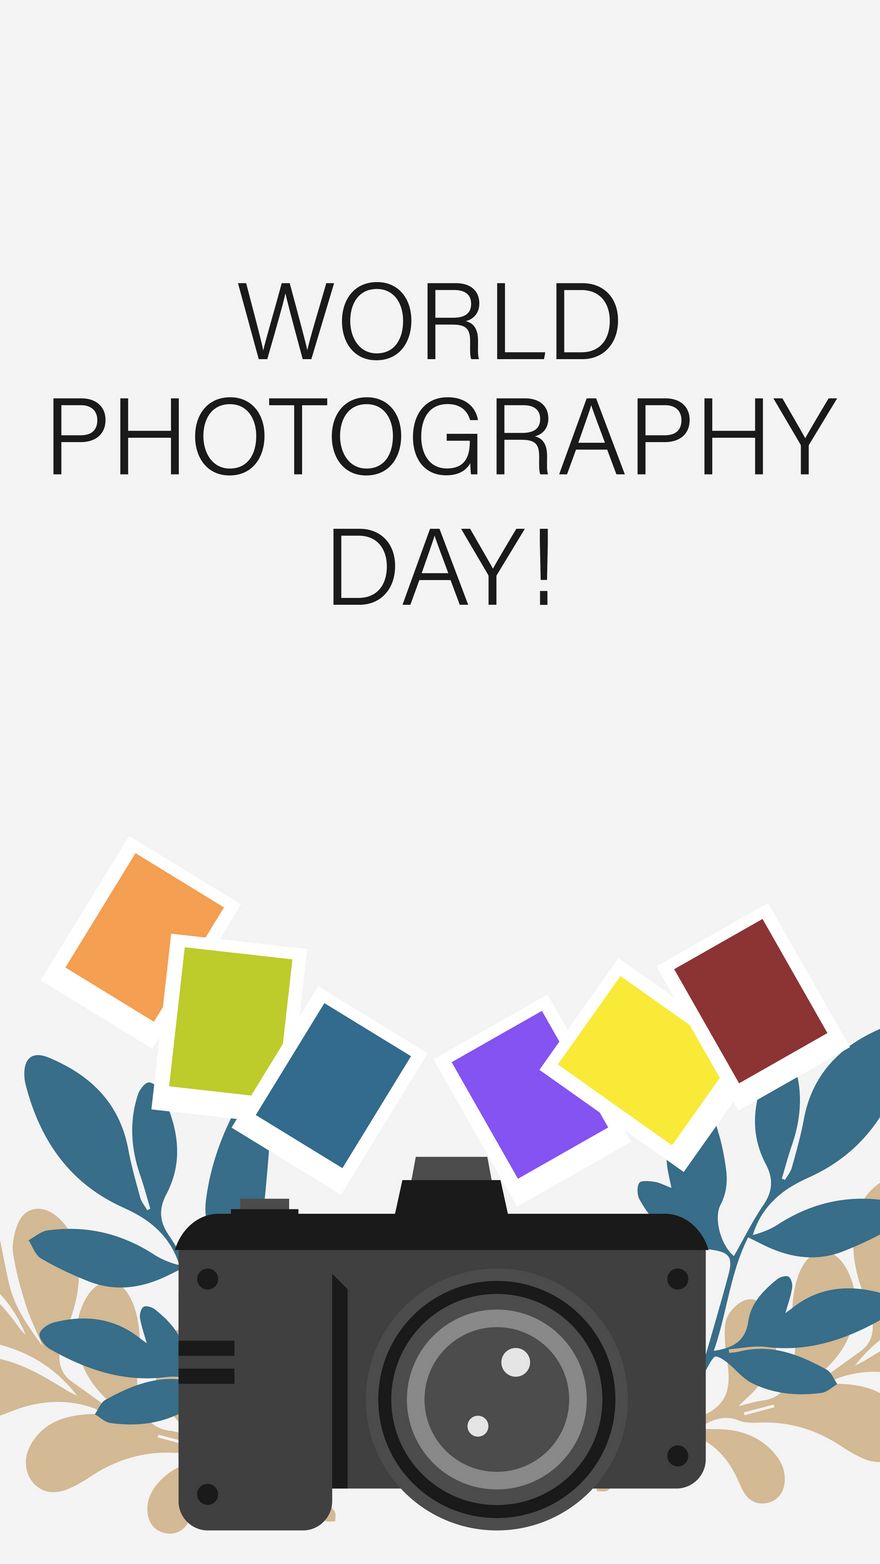 World Photography Day Greeting Card Background